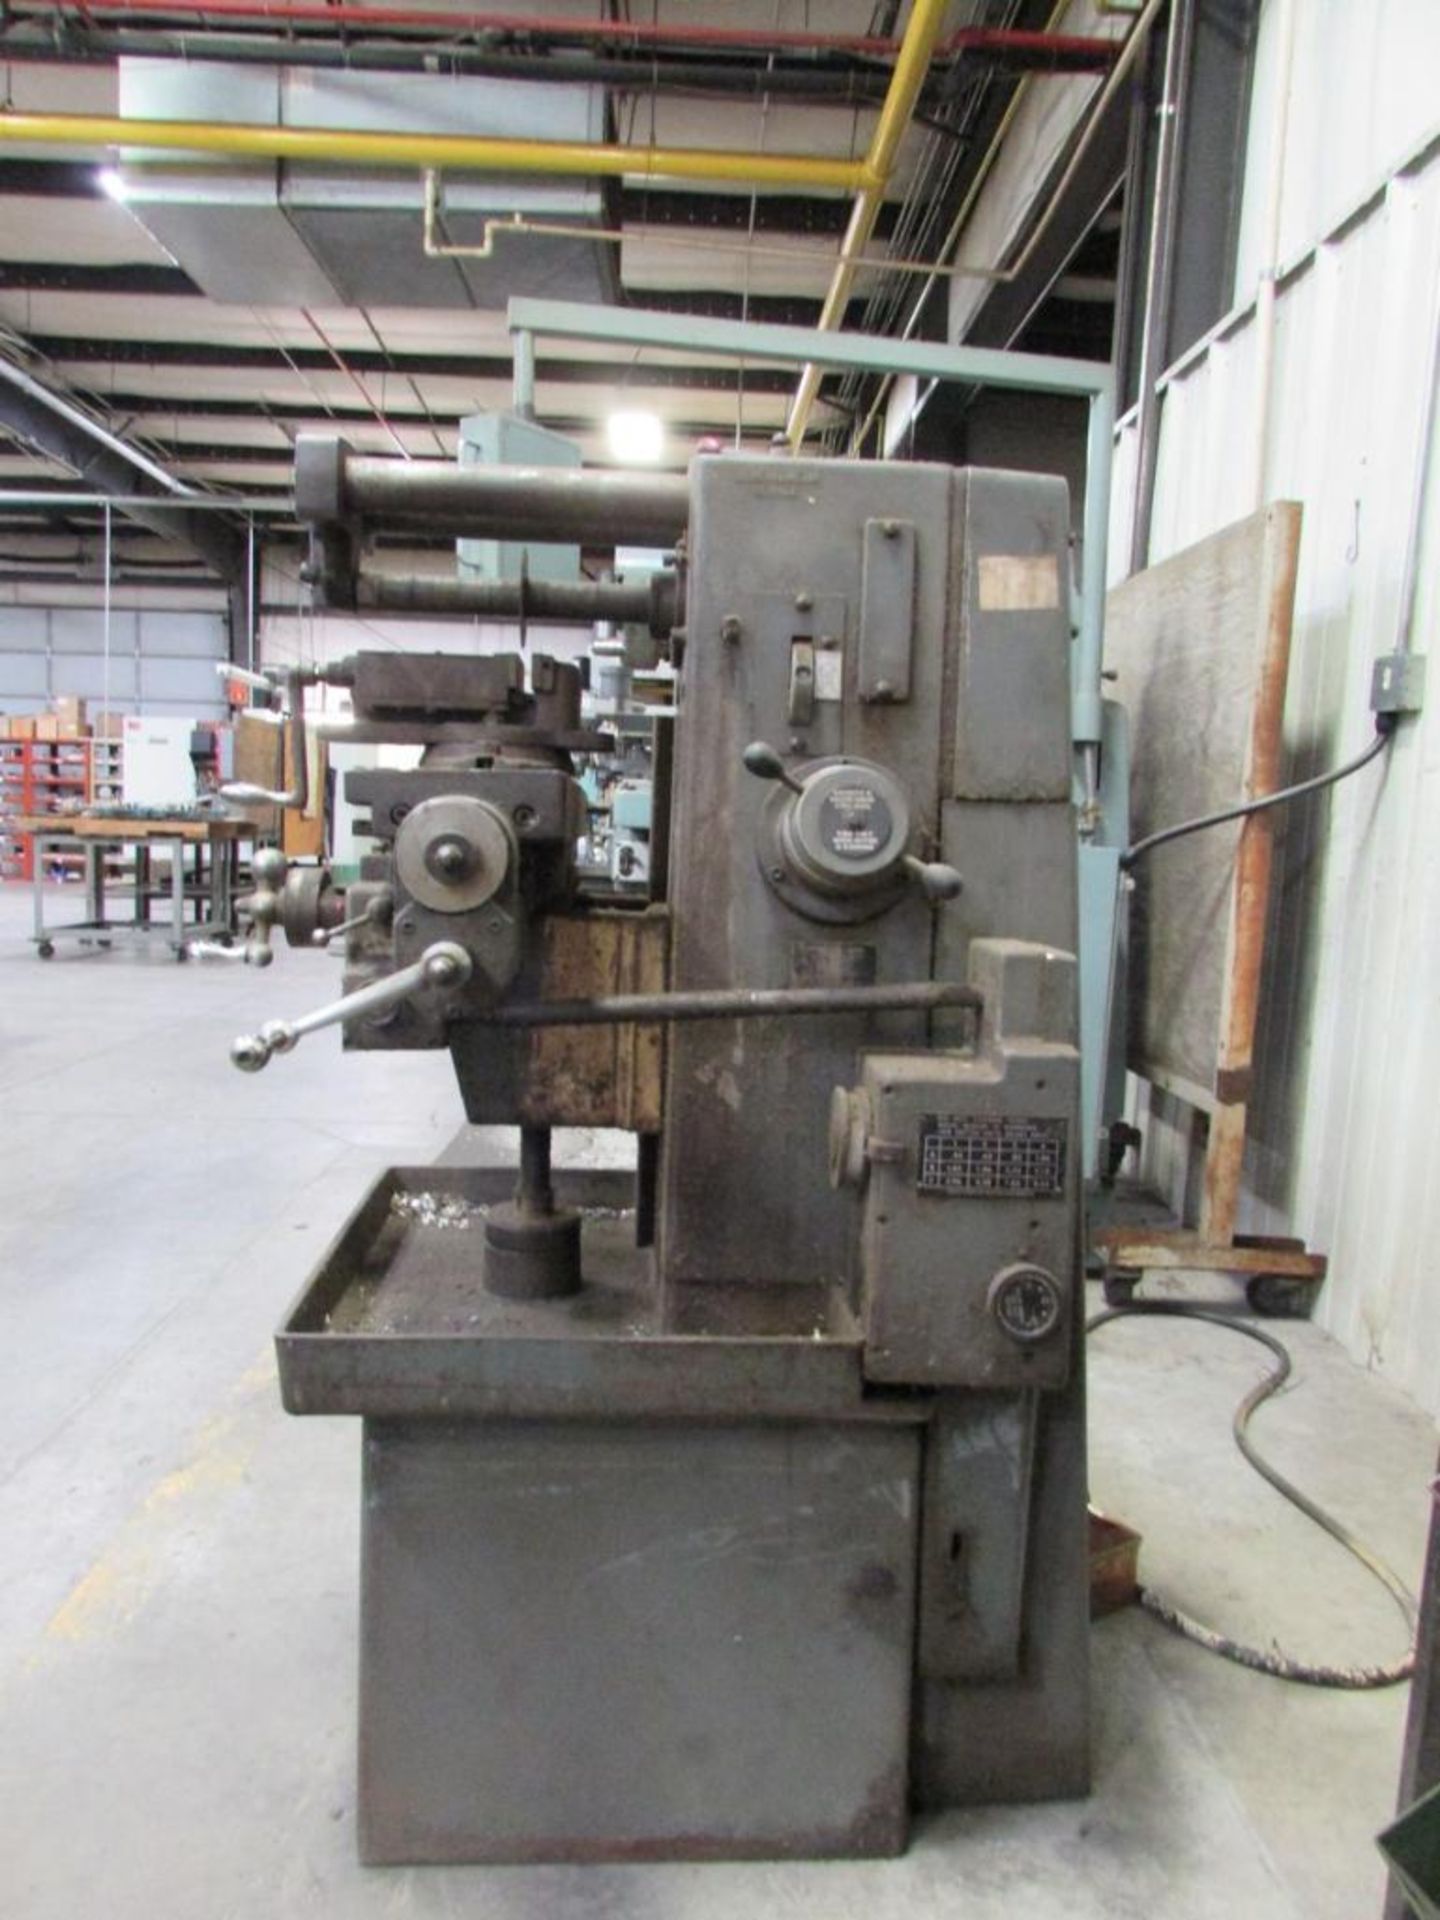 Clausing 8540 Horizontal Mill, 26" x 6.75" Table, Table Power Feed with Variable Feed Control, 4.25: - Image 6 of 7